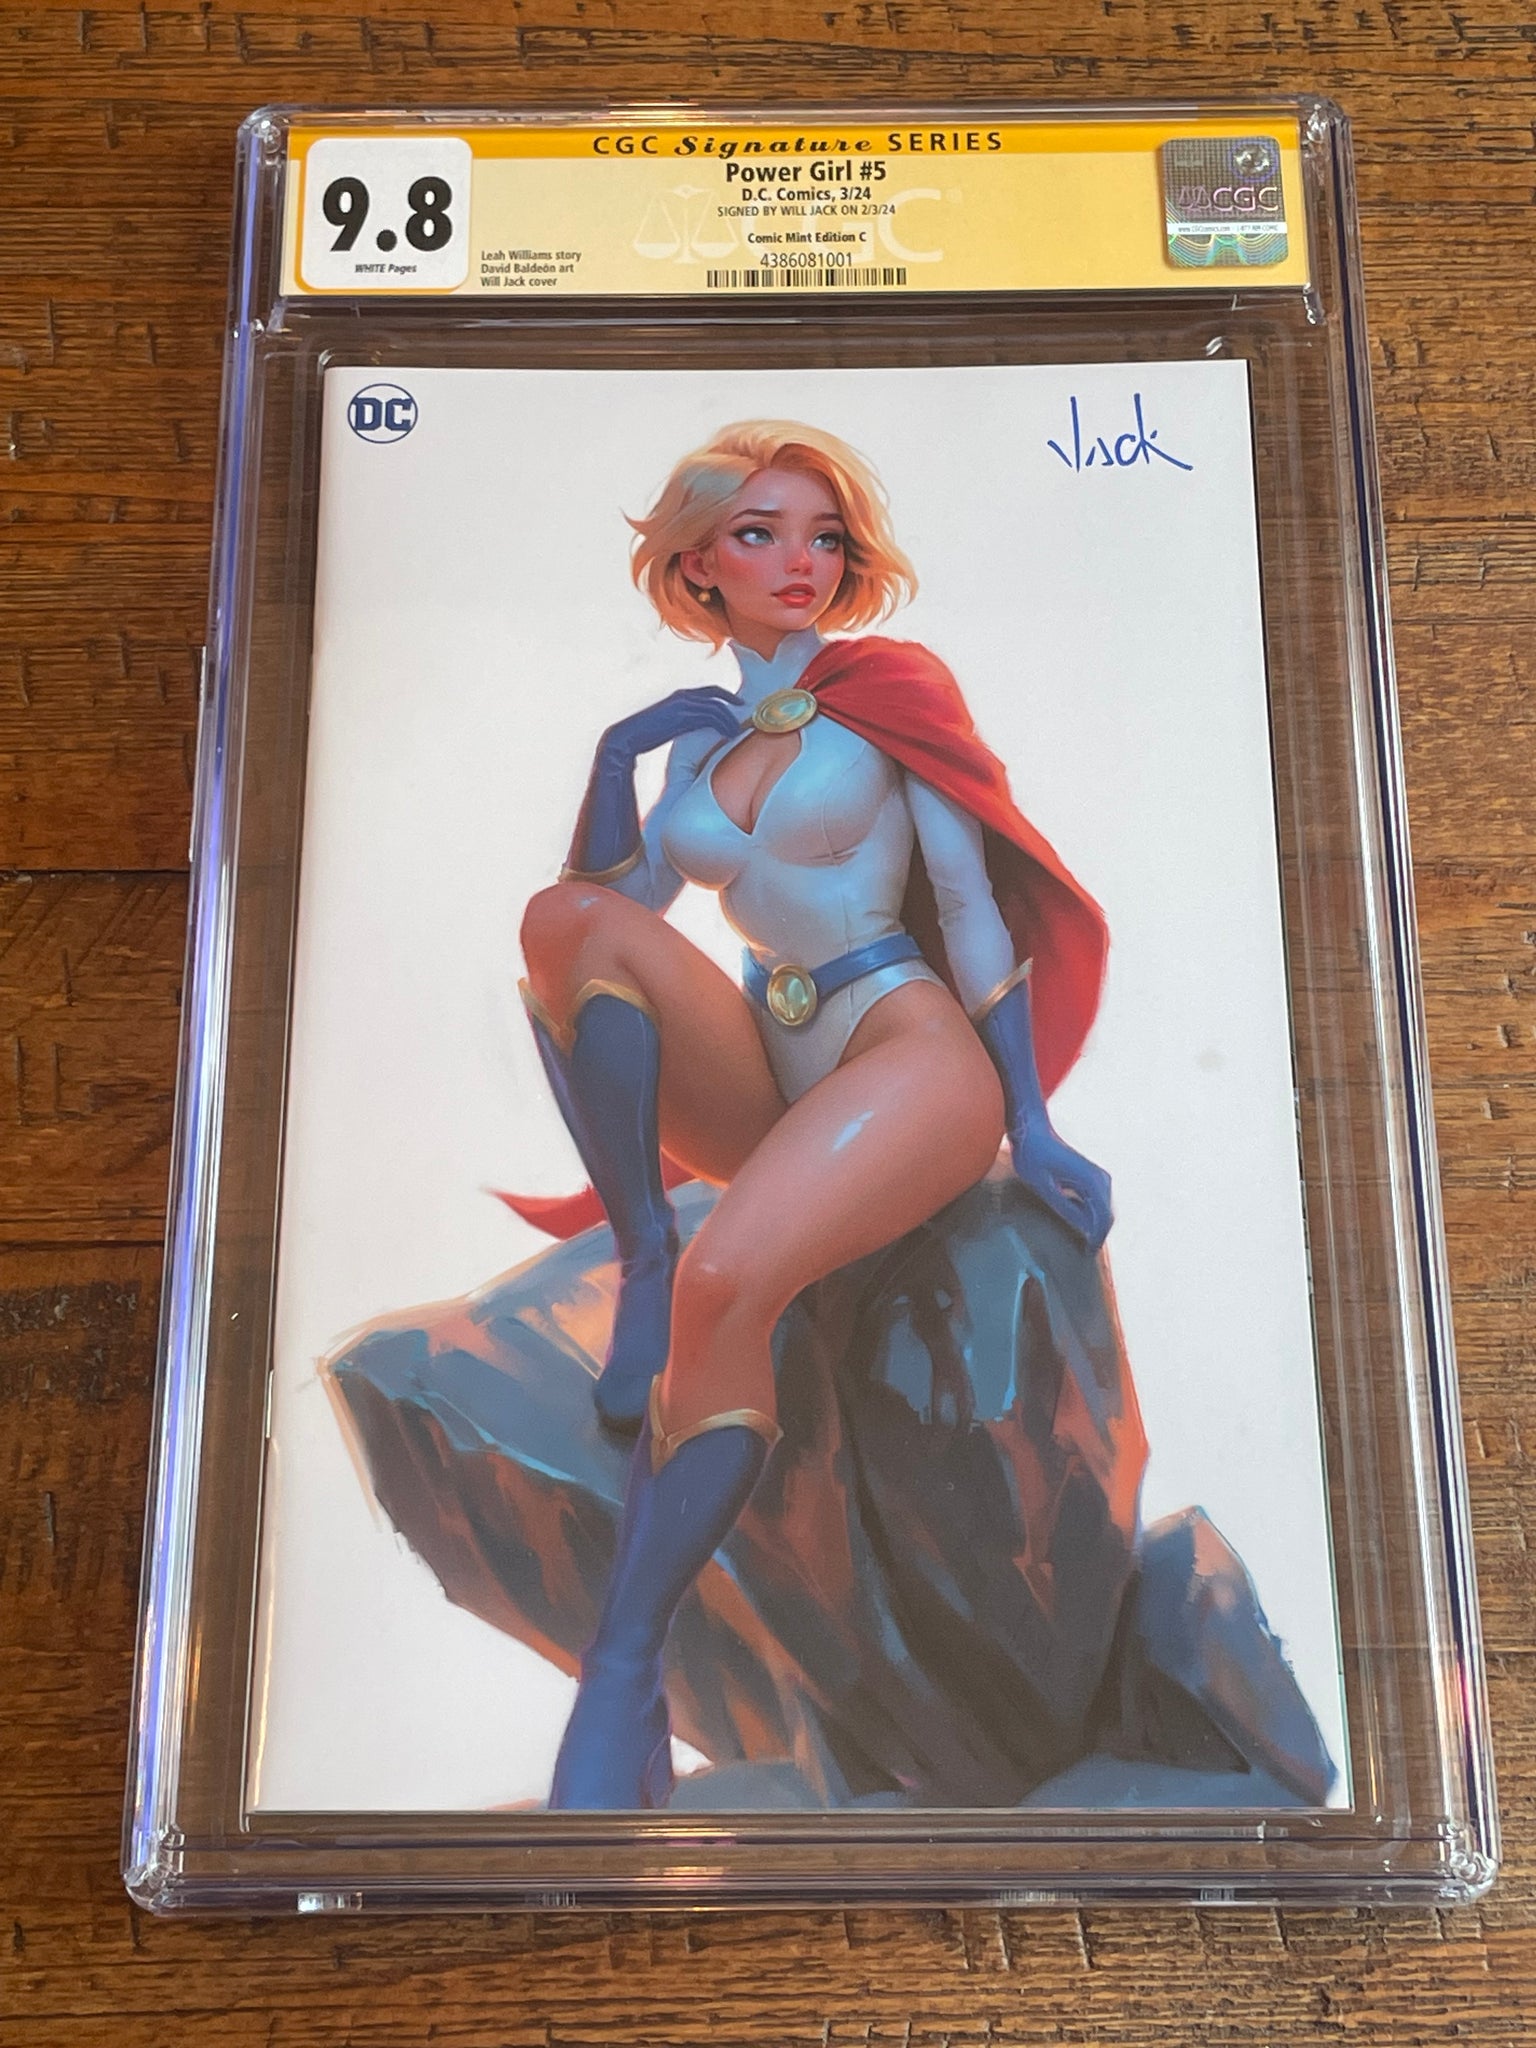 POWER GIRL #5 CGC SS 9.8 WILL JACK SIGNED MEGACON EXCL WHITE VIRGIN VARIANT-C